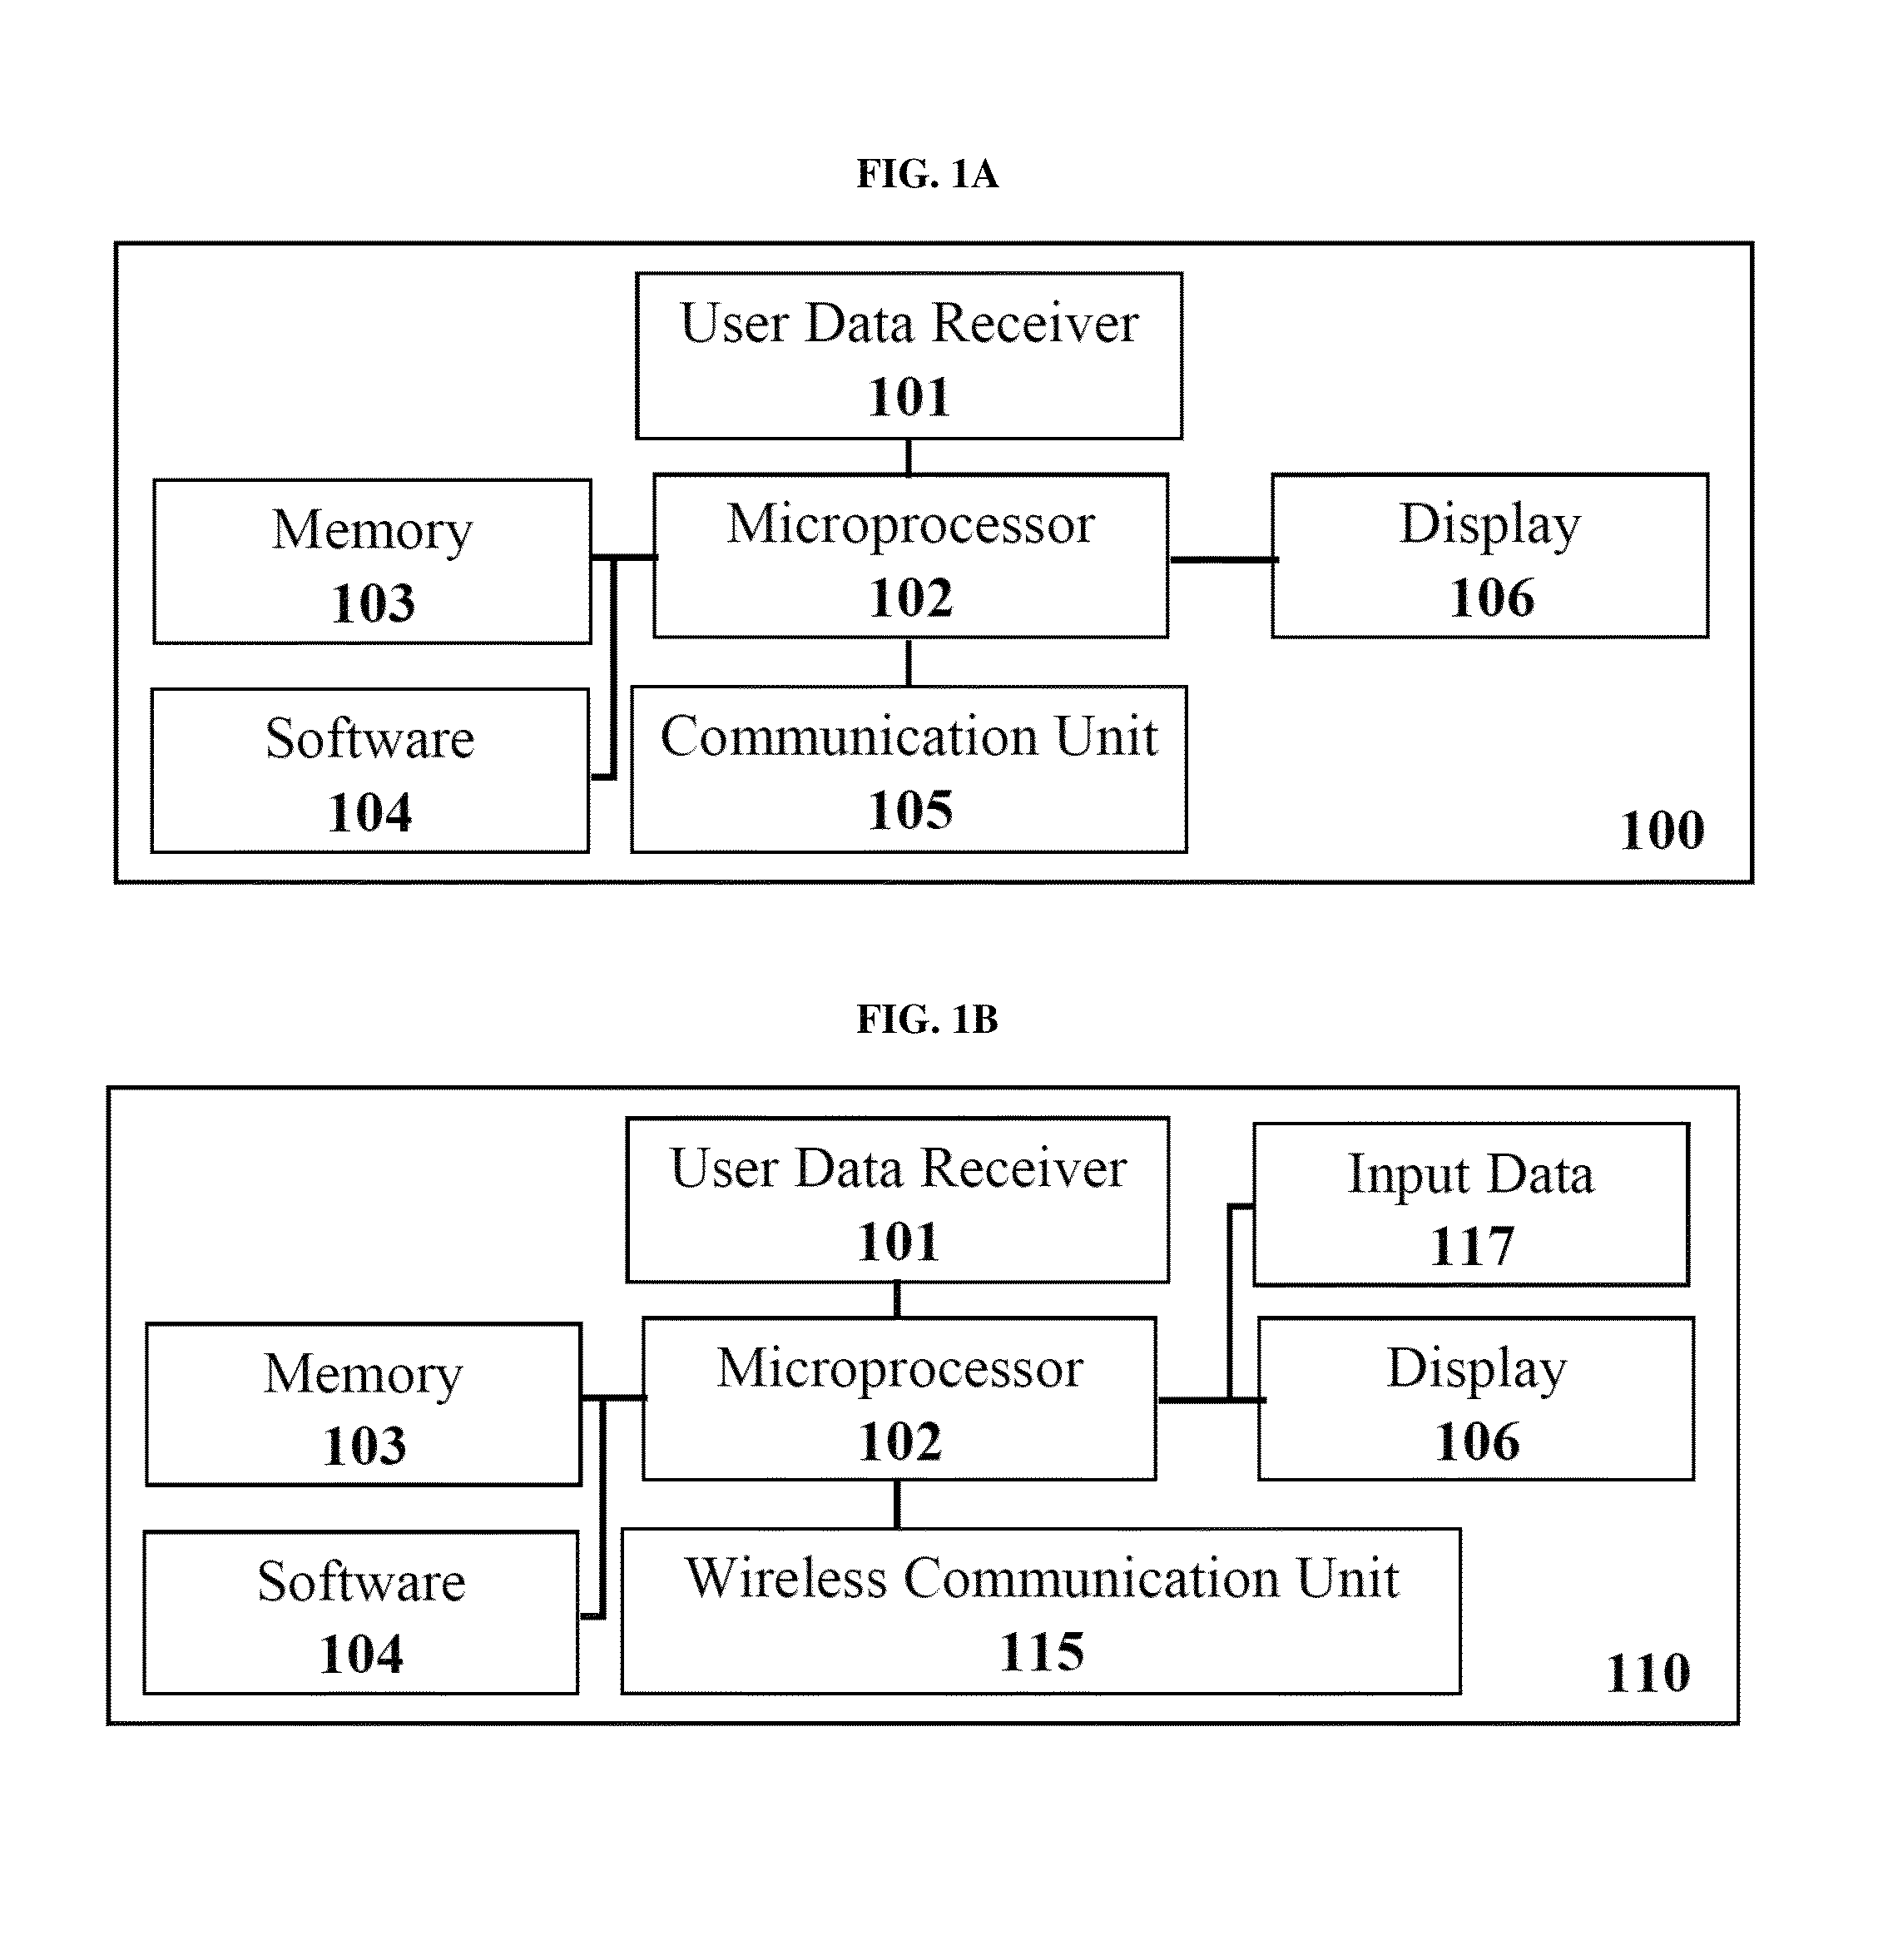 Portable computing device and analyses of personal data captured therefrom